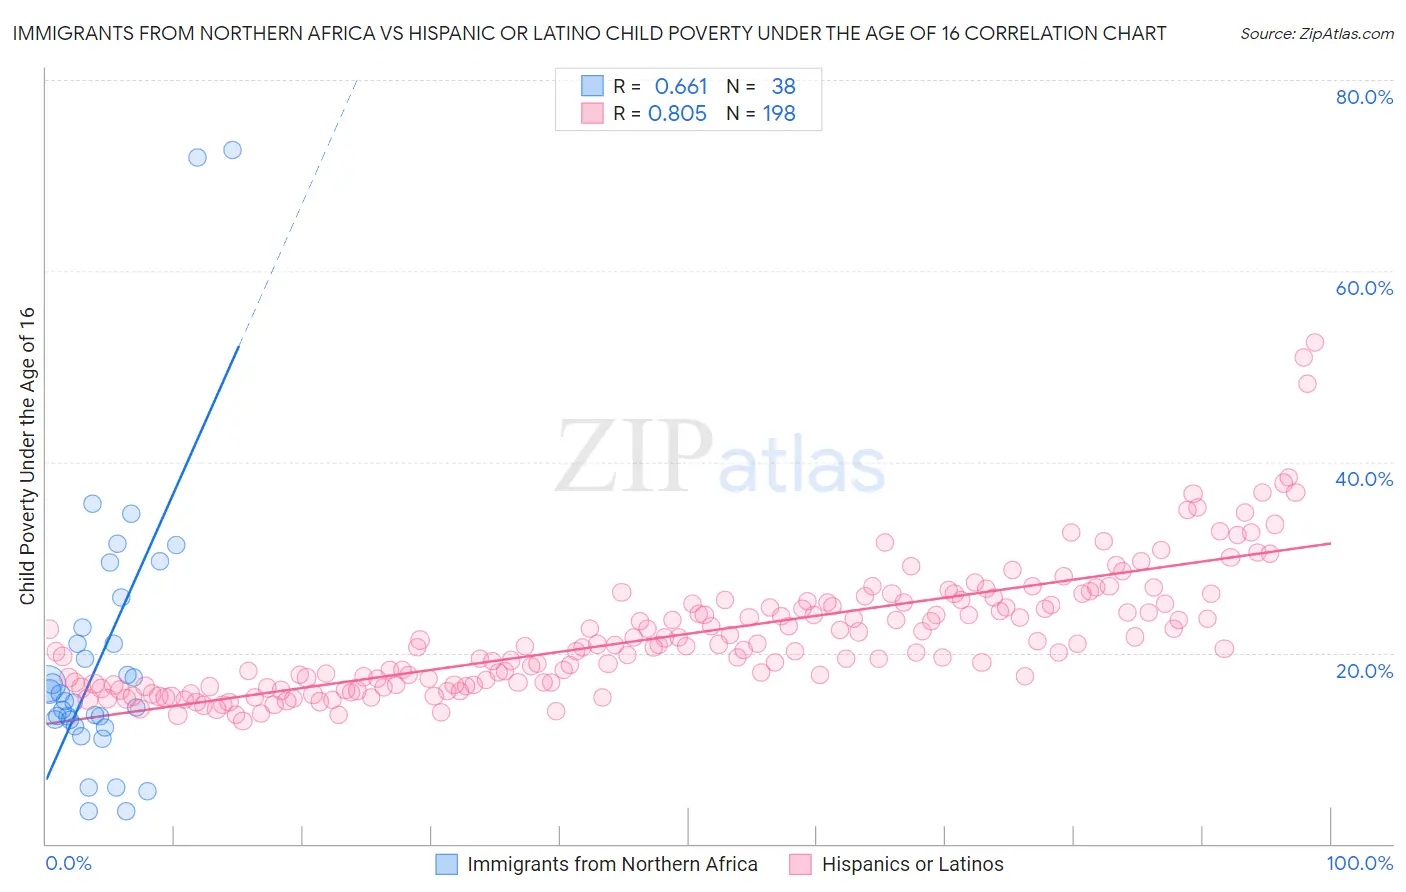 Immigrants from Northern Africa vs Hispanic or Latino Child Poverty Under the Age of 16